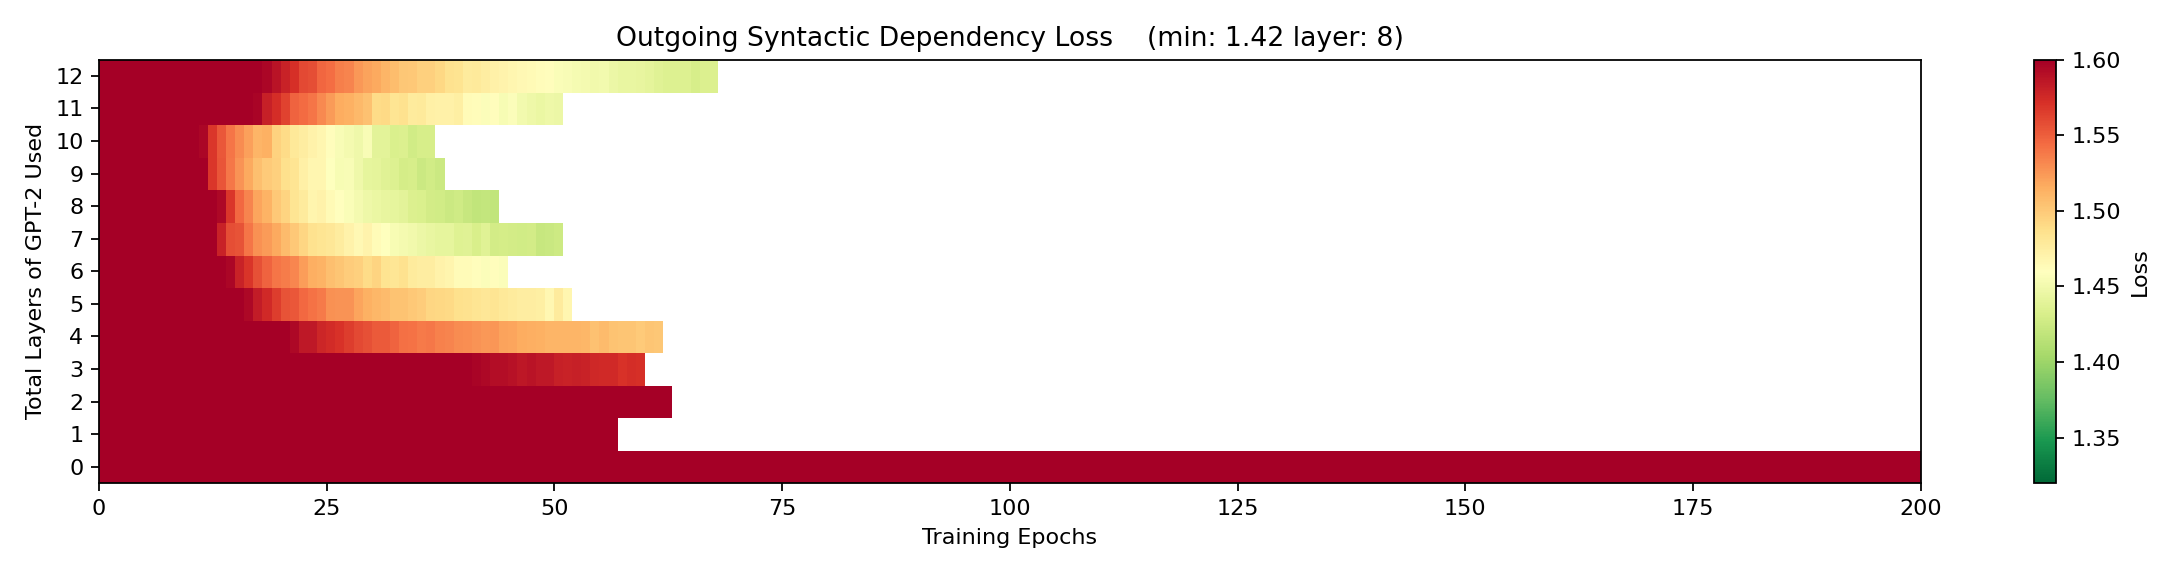 Outgoing dependency loss by layer